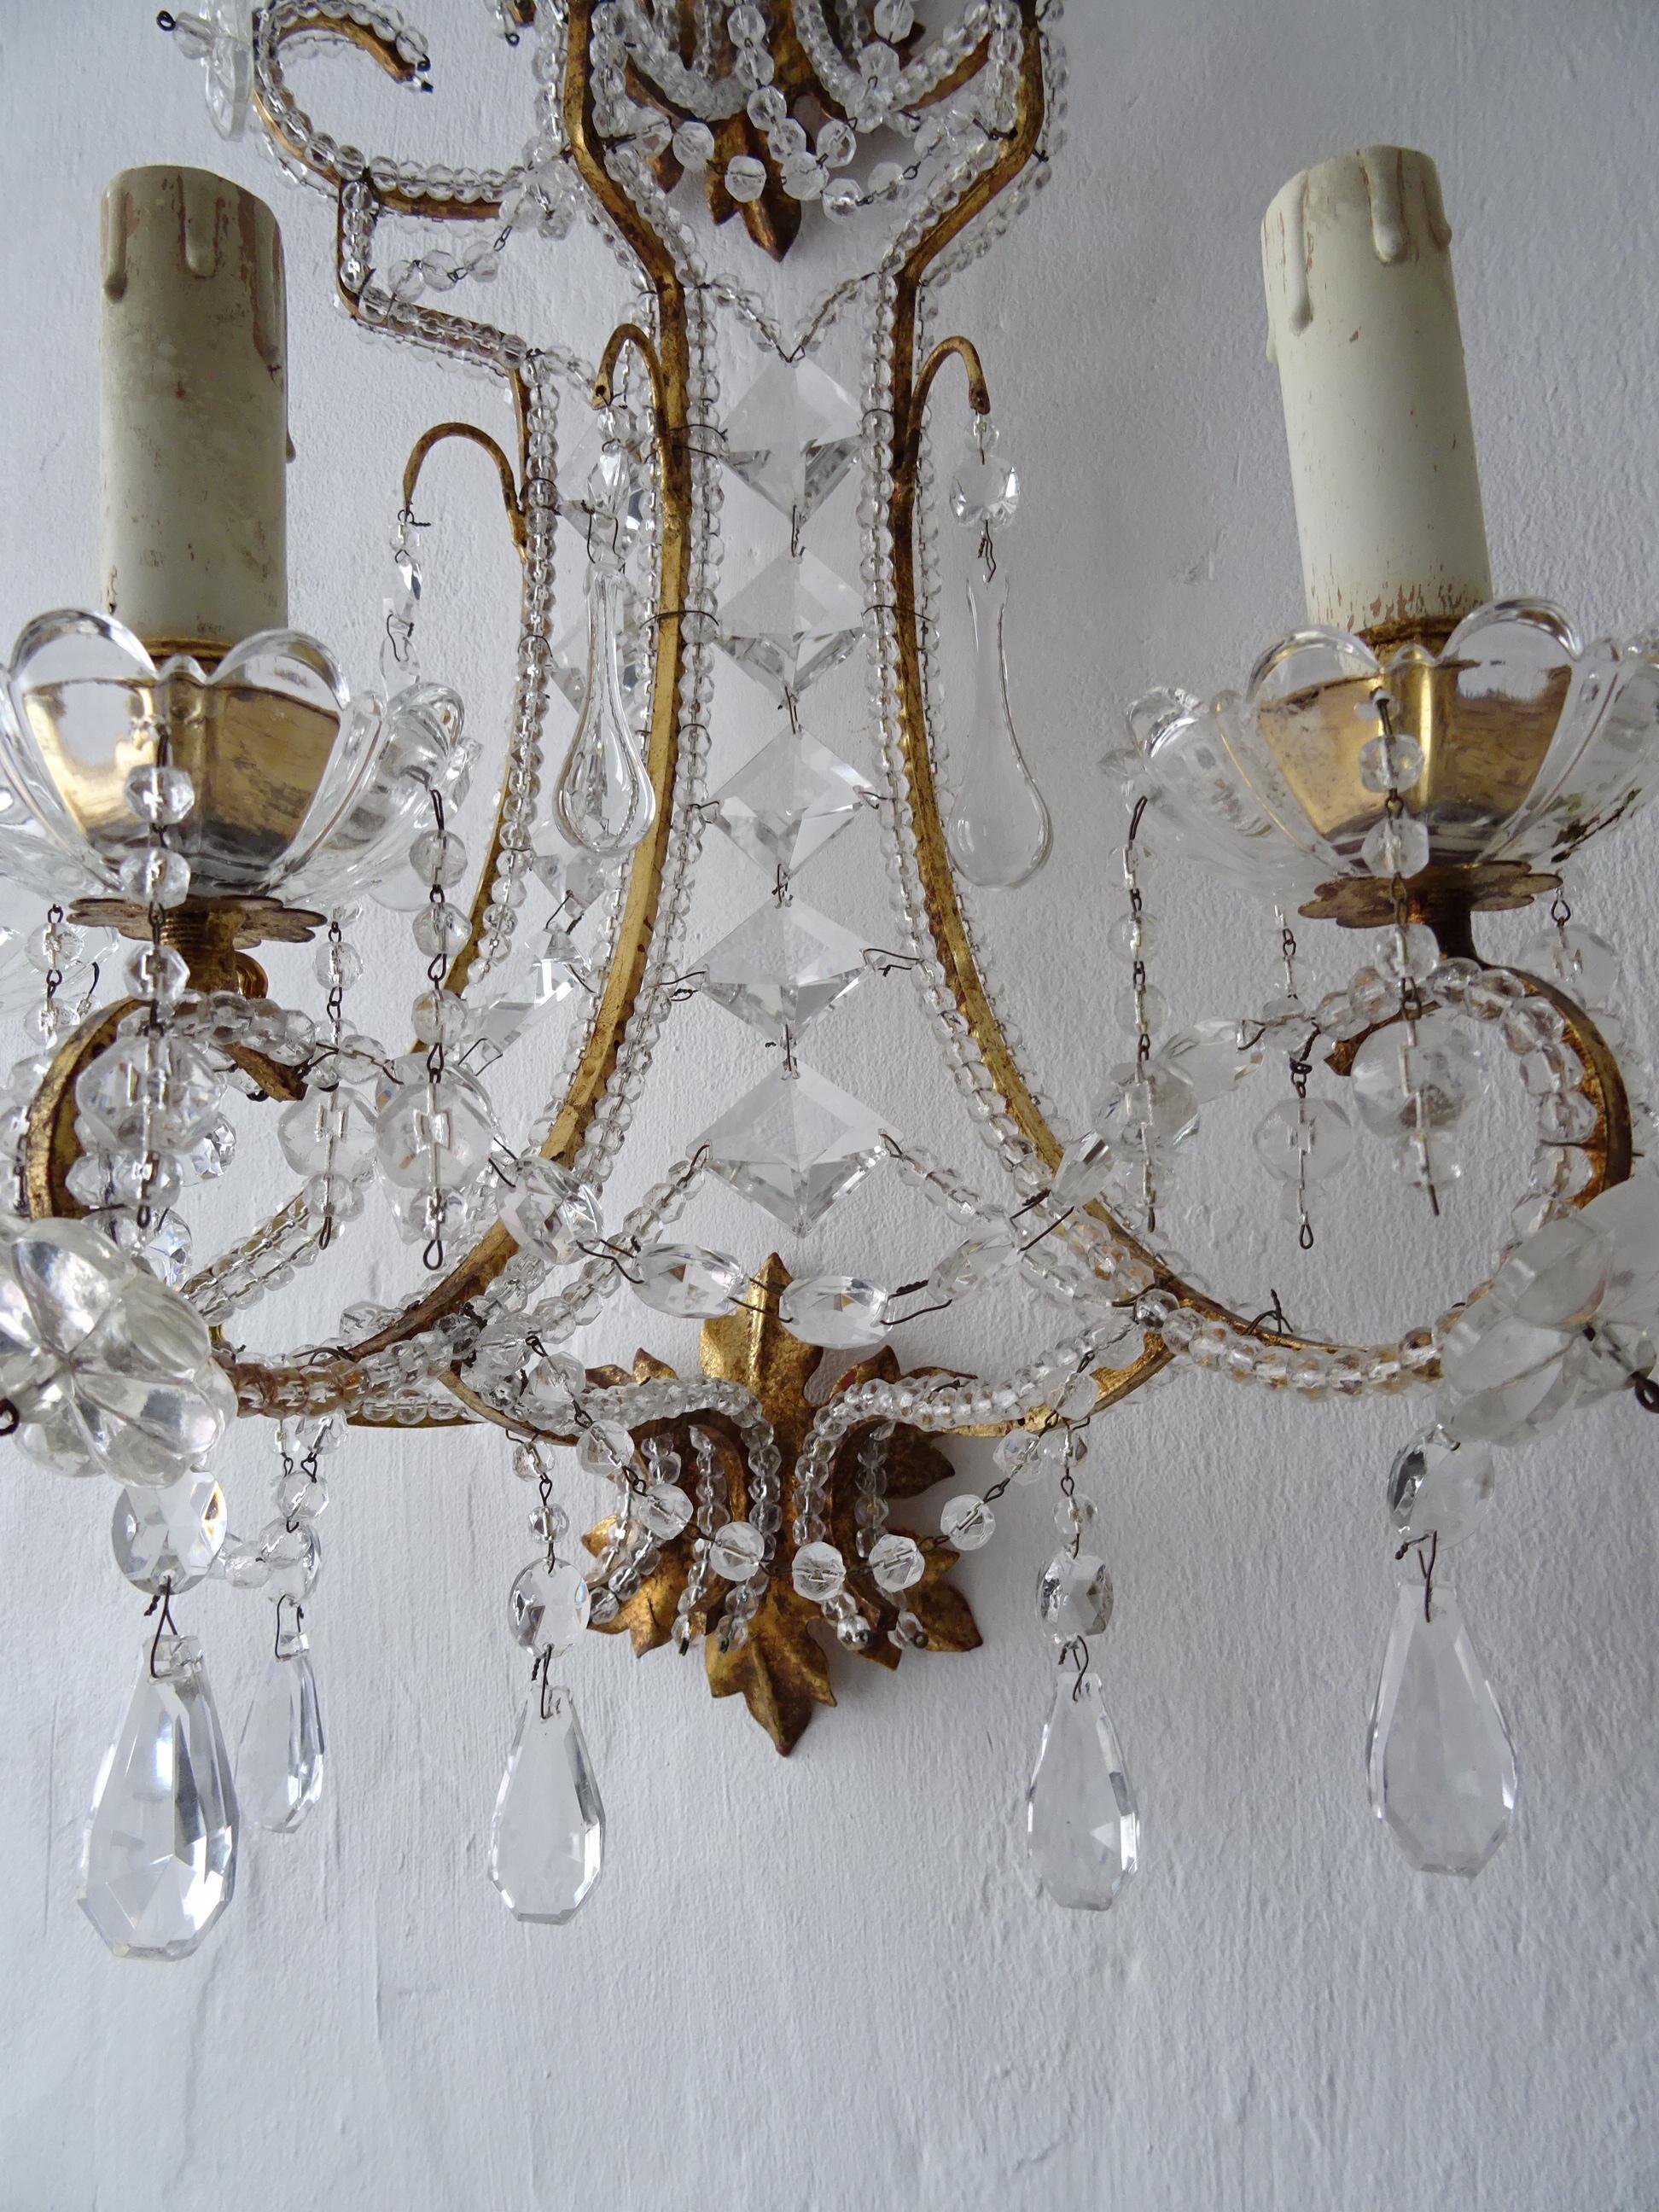 Italian Big Beaded Crystal Prisms Murano Drops Sconces Gold Gilt Metal c1900 For Sale 1